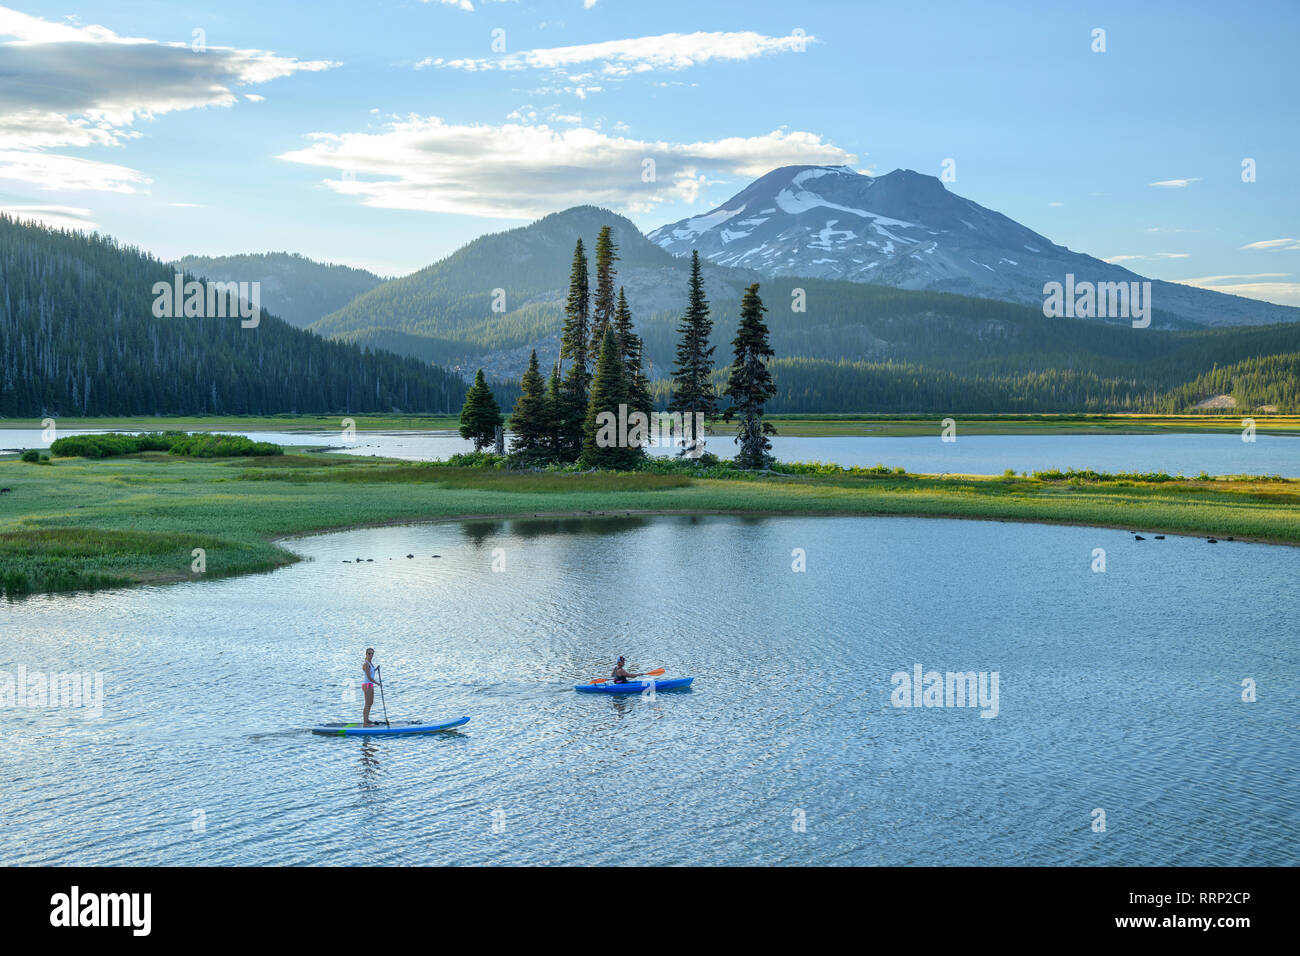 North America, America, USA, American, Pacific Northwest, Oregon, Deschutes National Forest, Broken Top, Sparks Lake, Stock Photo